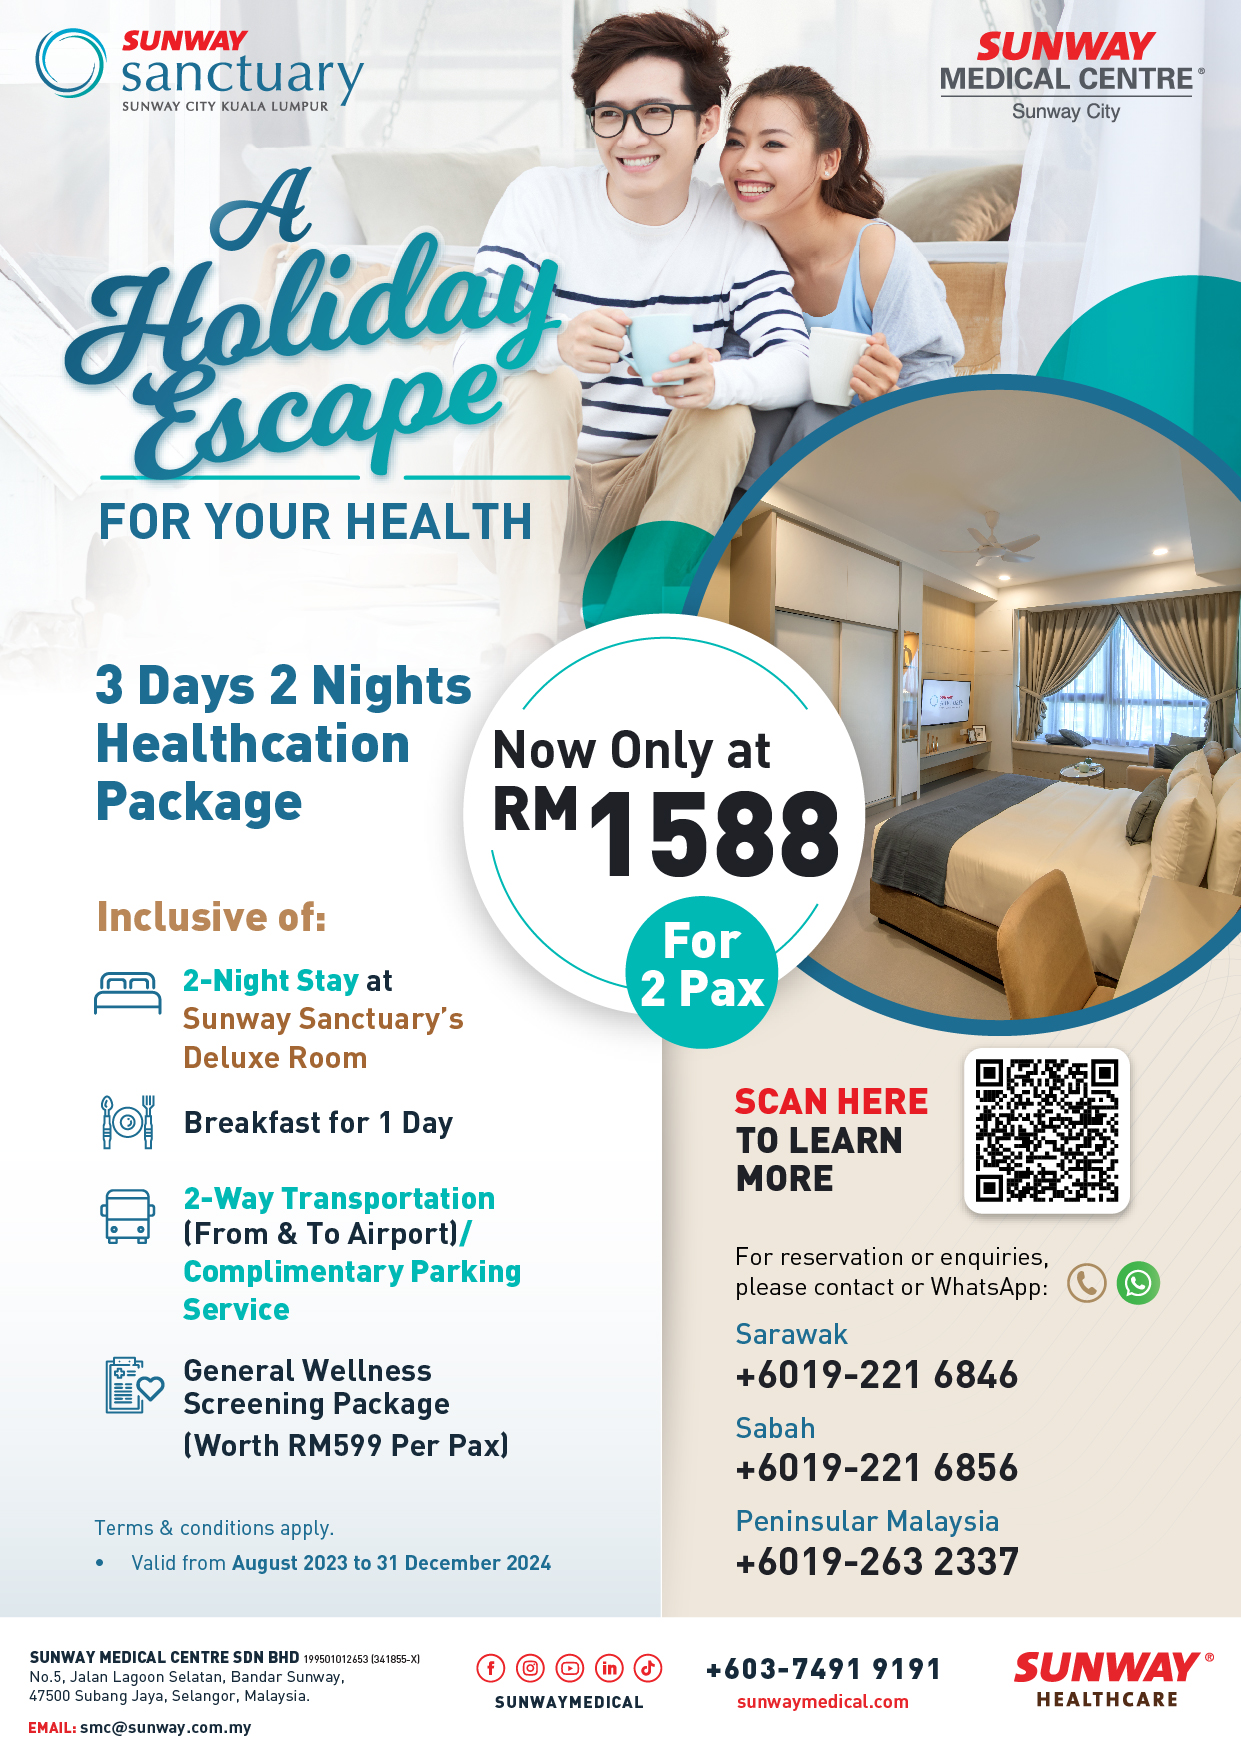 3 Days 2 Nights Healthcation Package